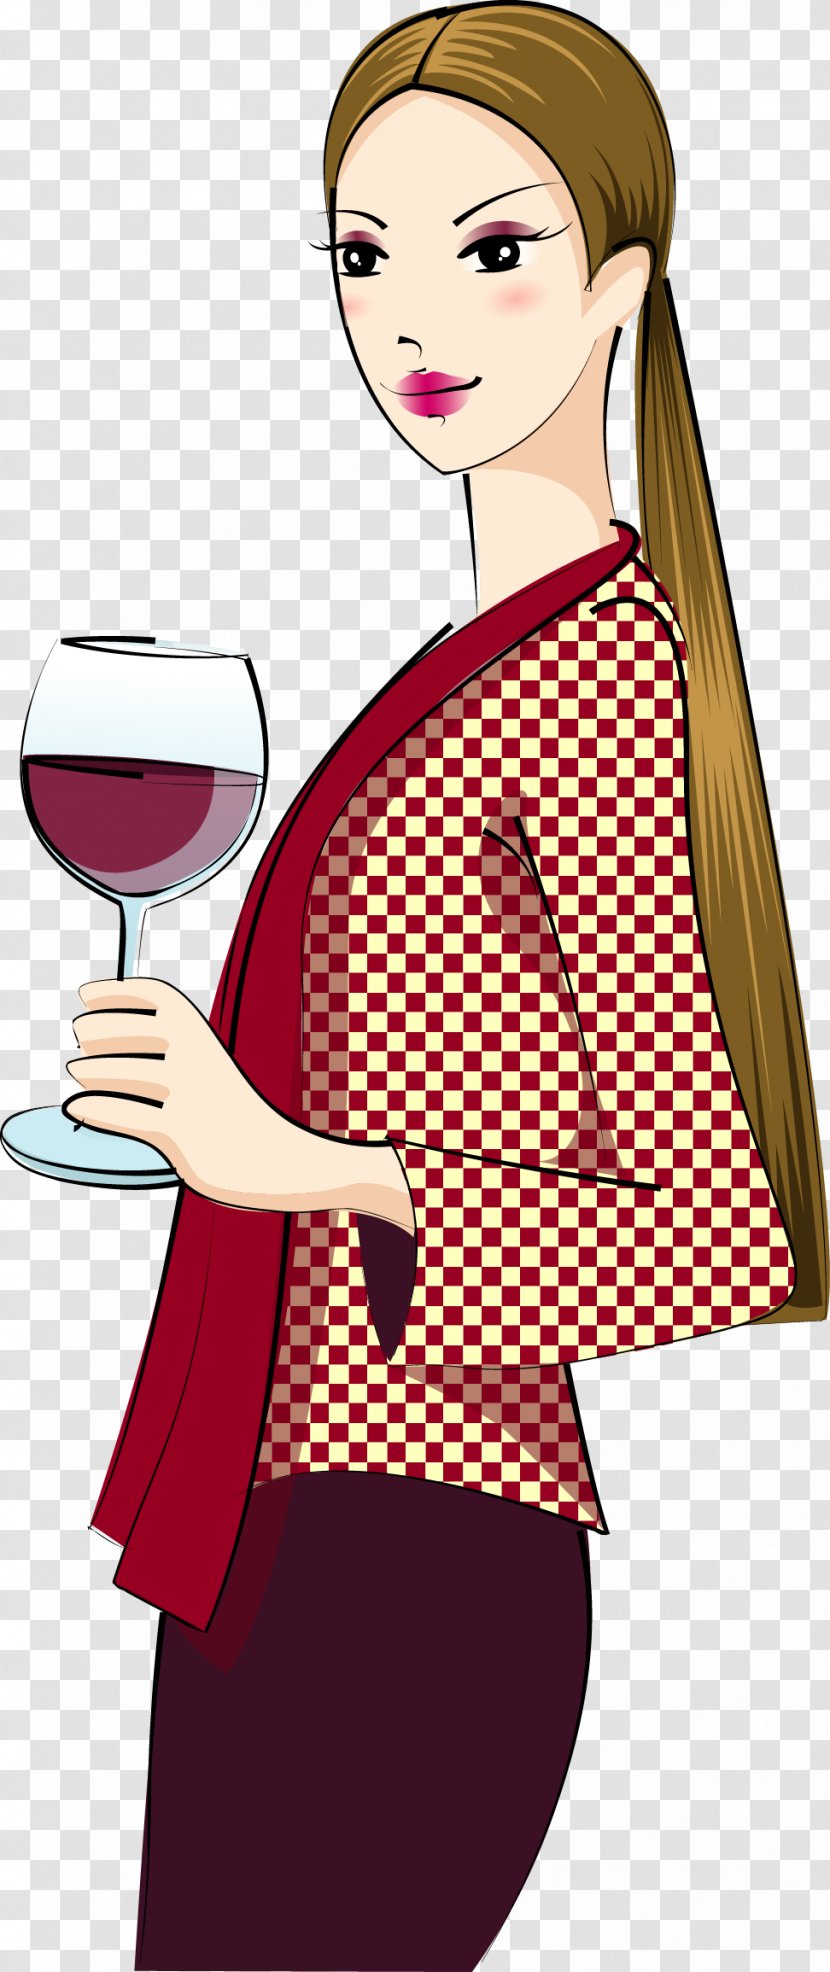 Red Wine Glass Woman - Frame - A Holding Transparent PNG